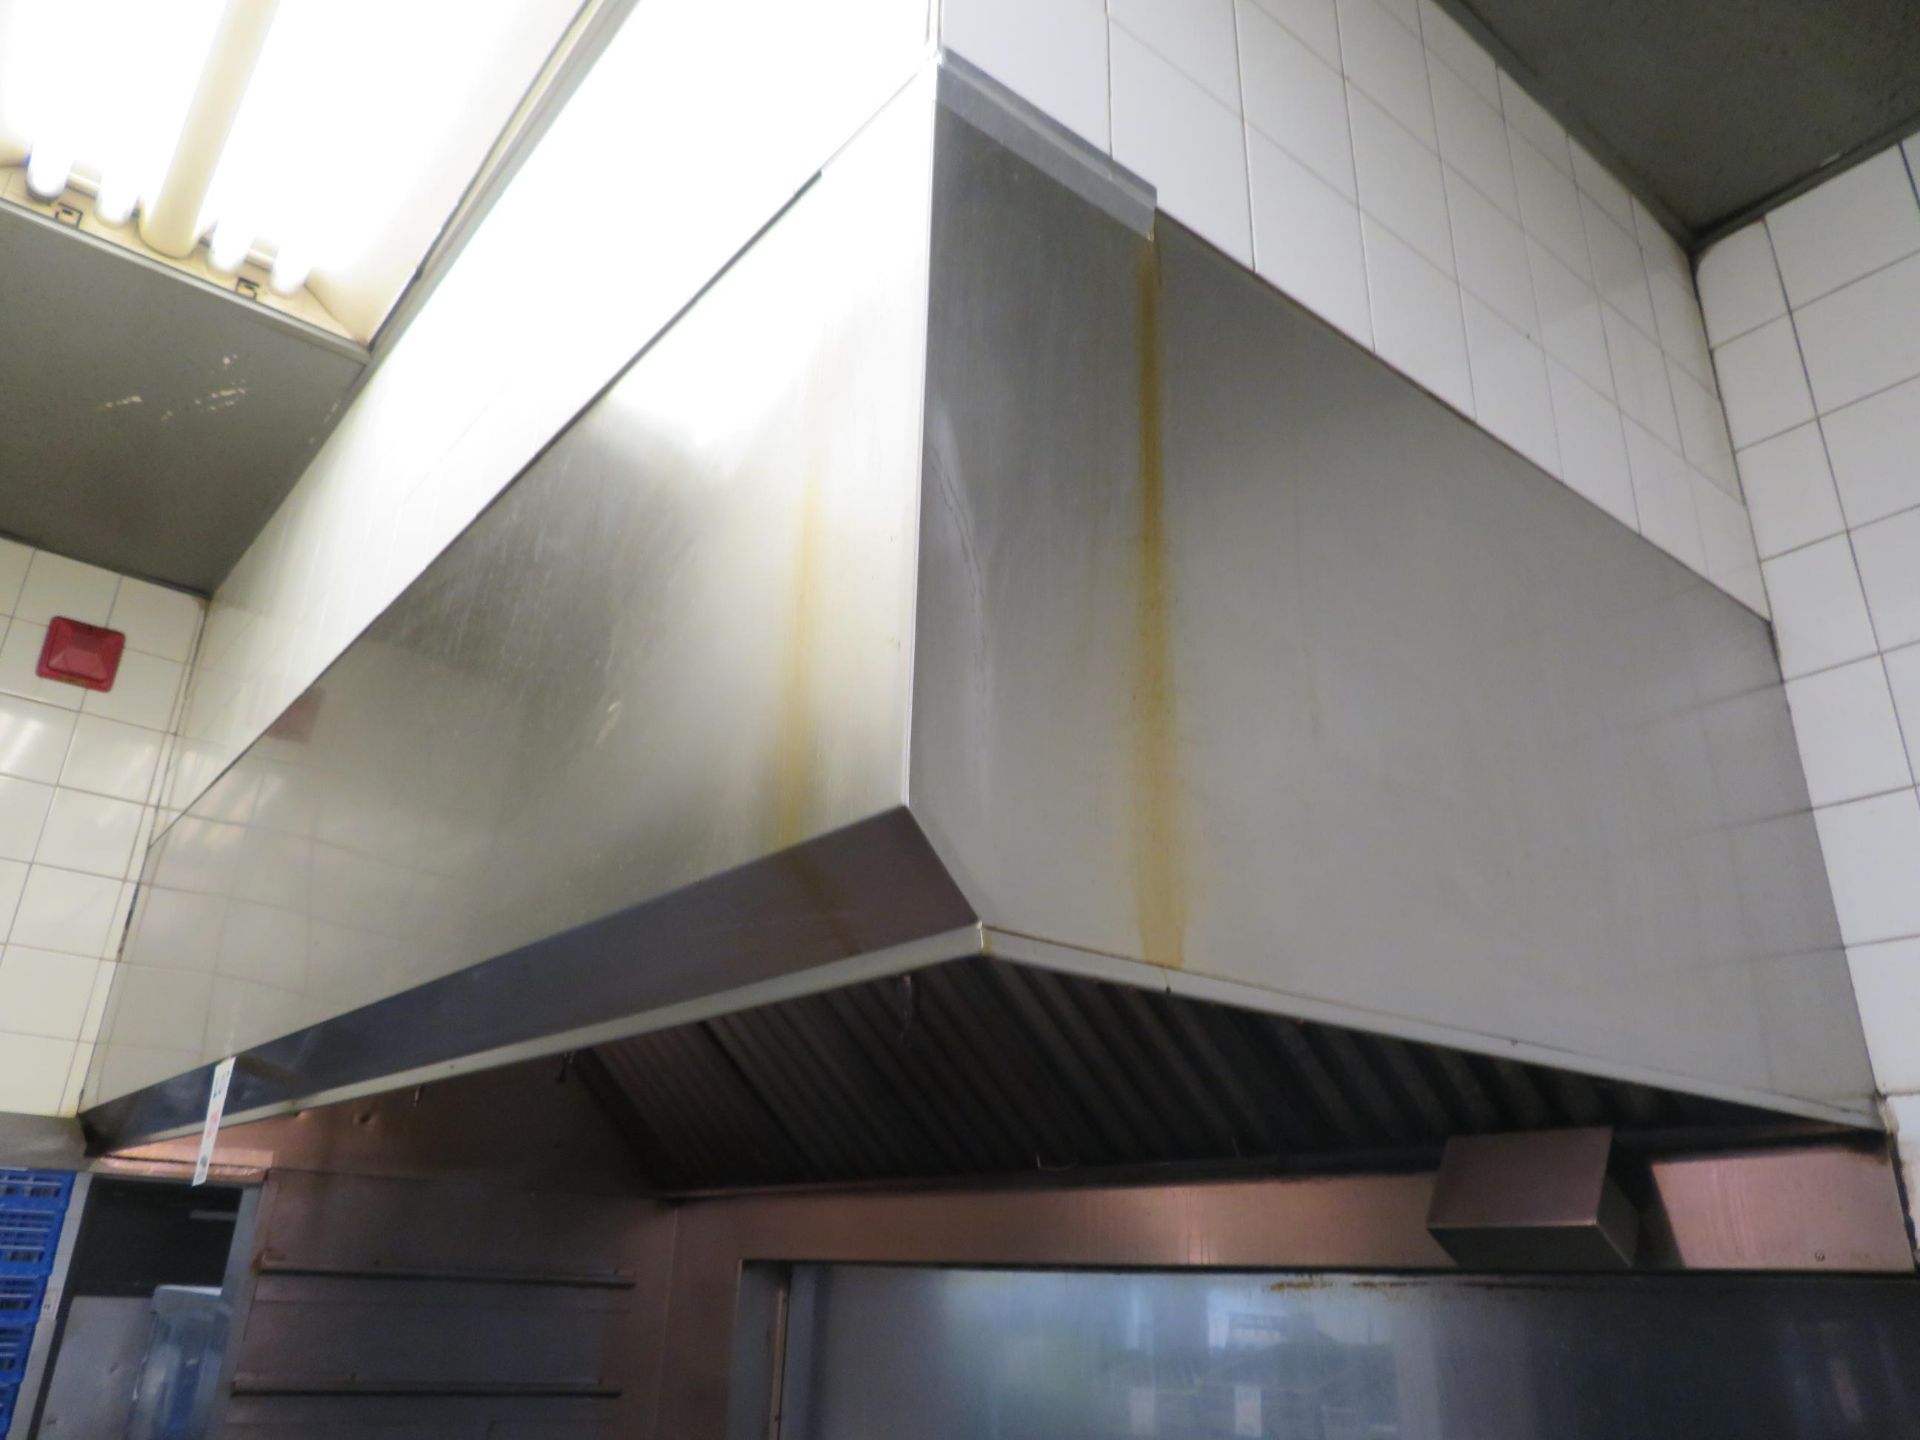 HCE ventilation hood with C02 system approx. 96"w x 47"d